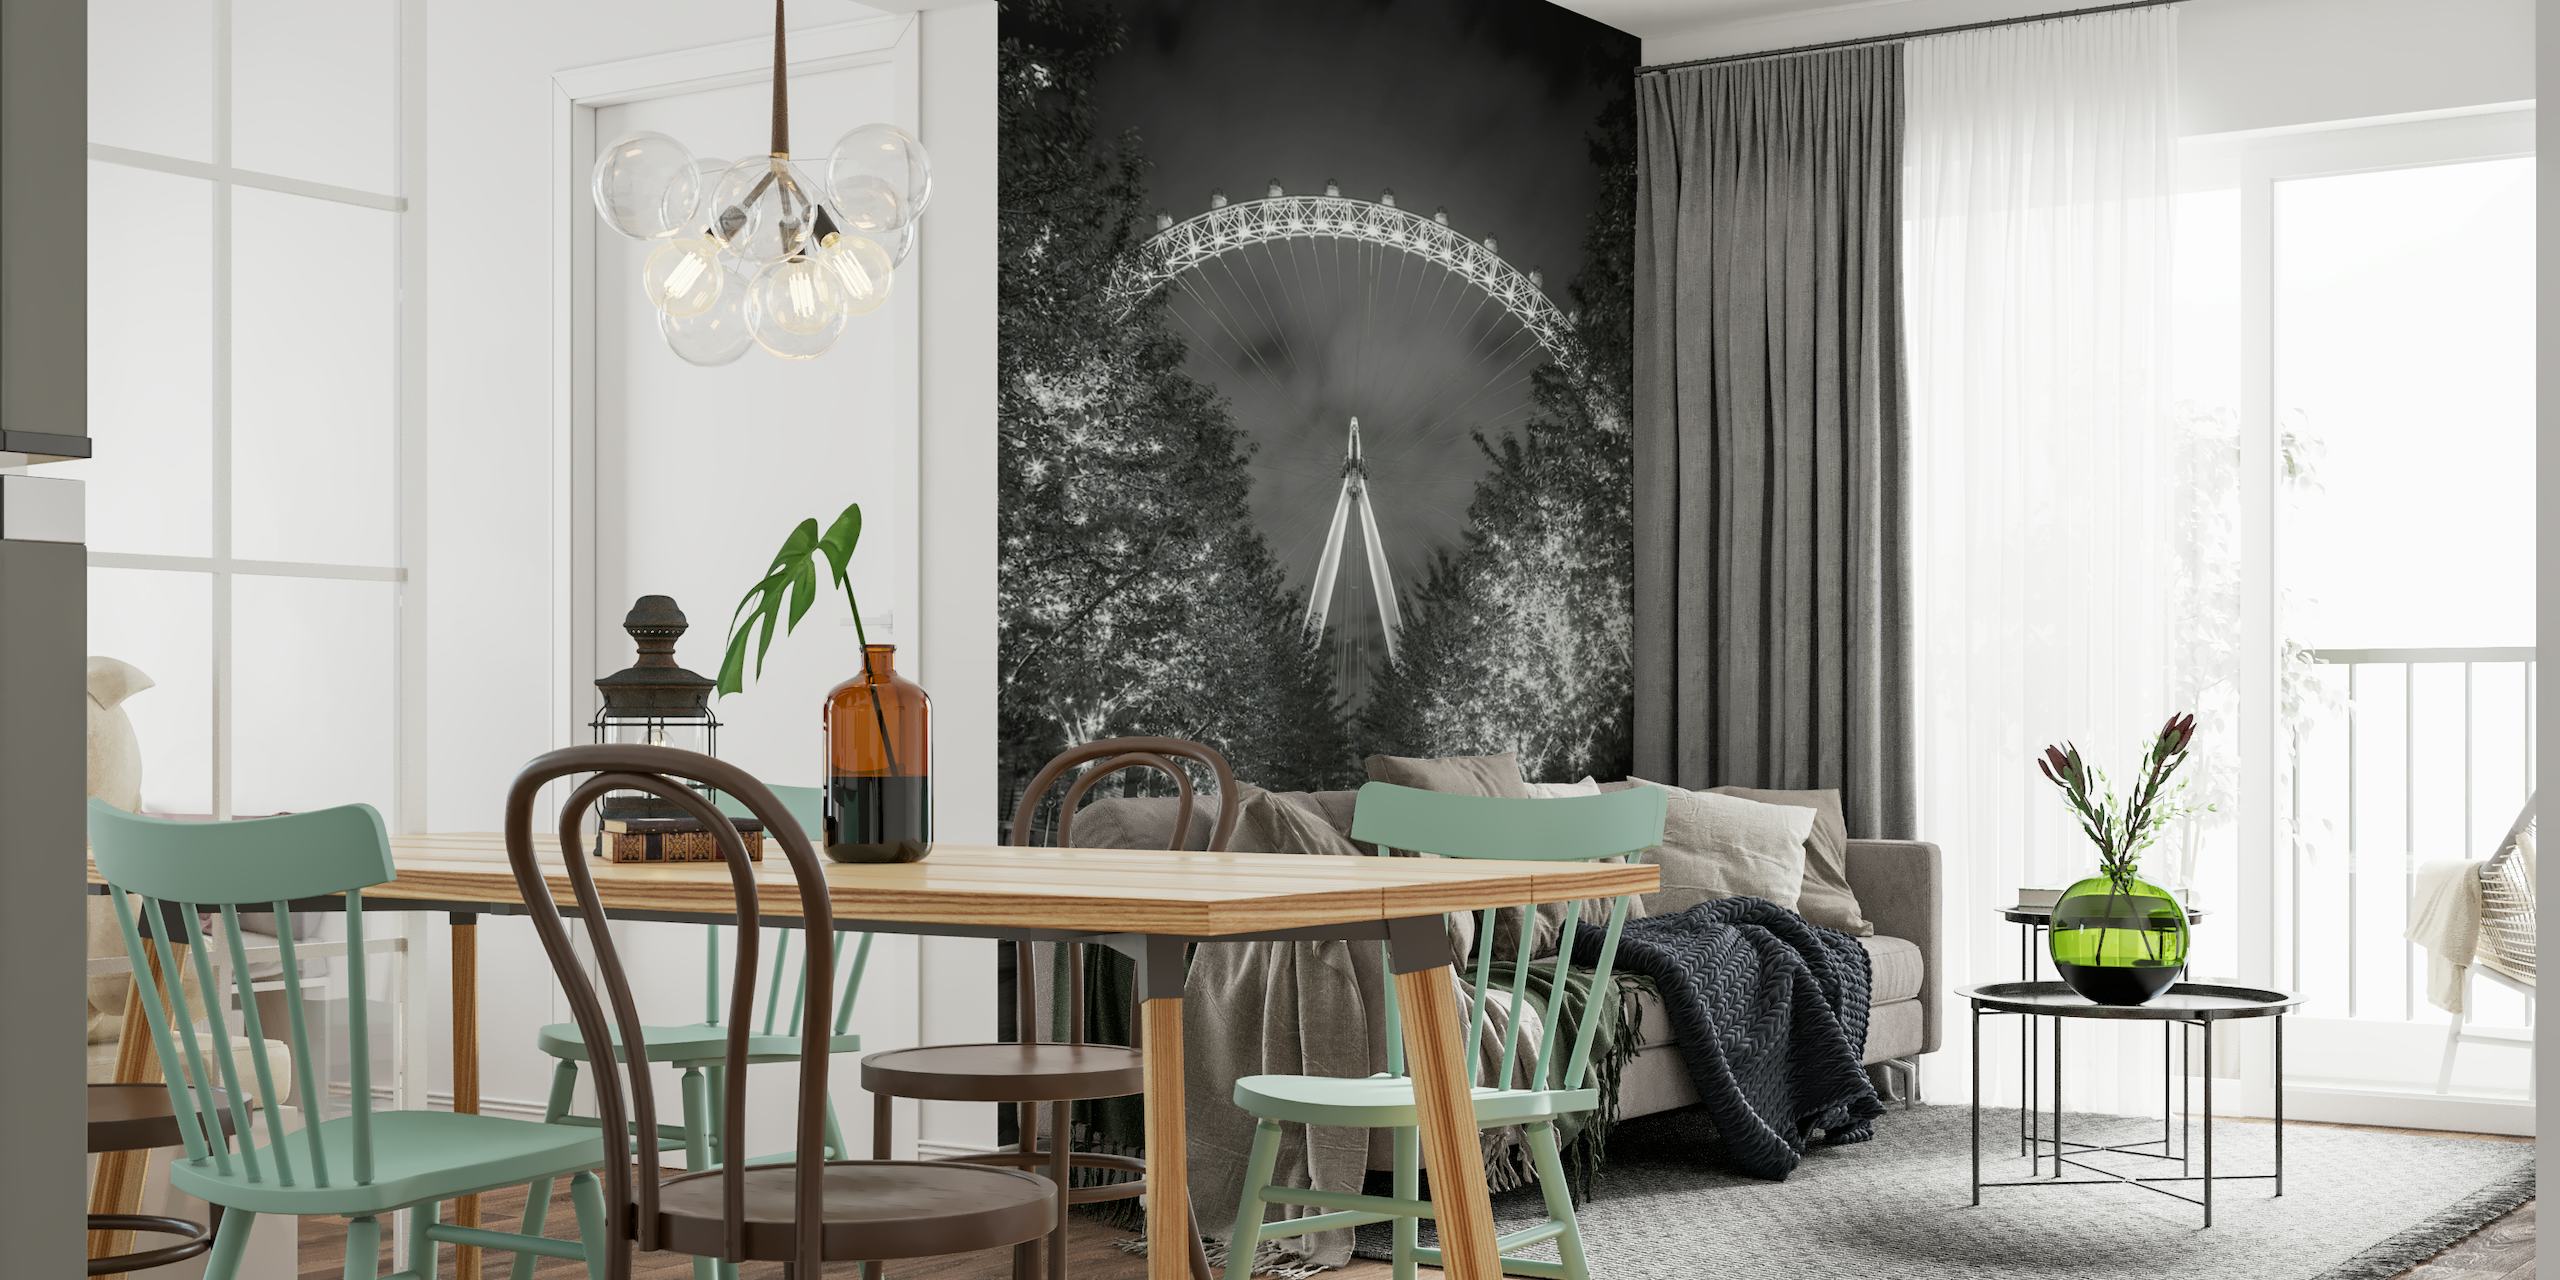 Black and white wall mural of a lit Ferris wheel at night with decorative tree lights